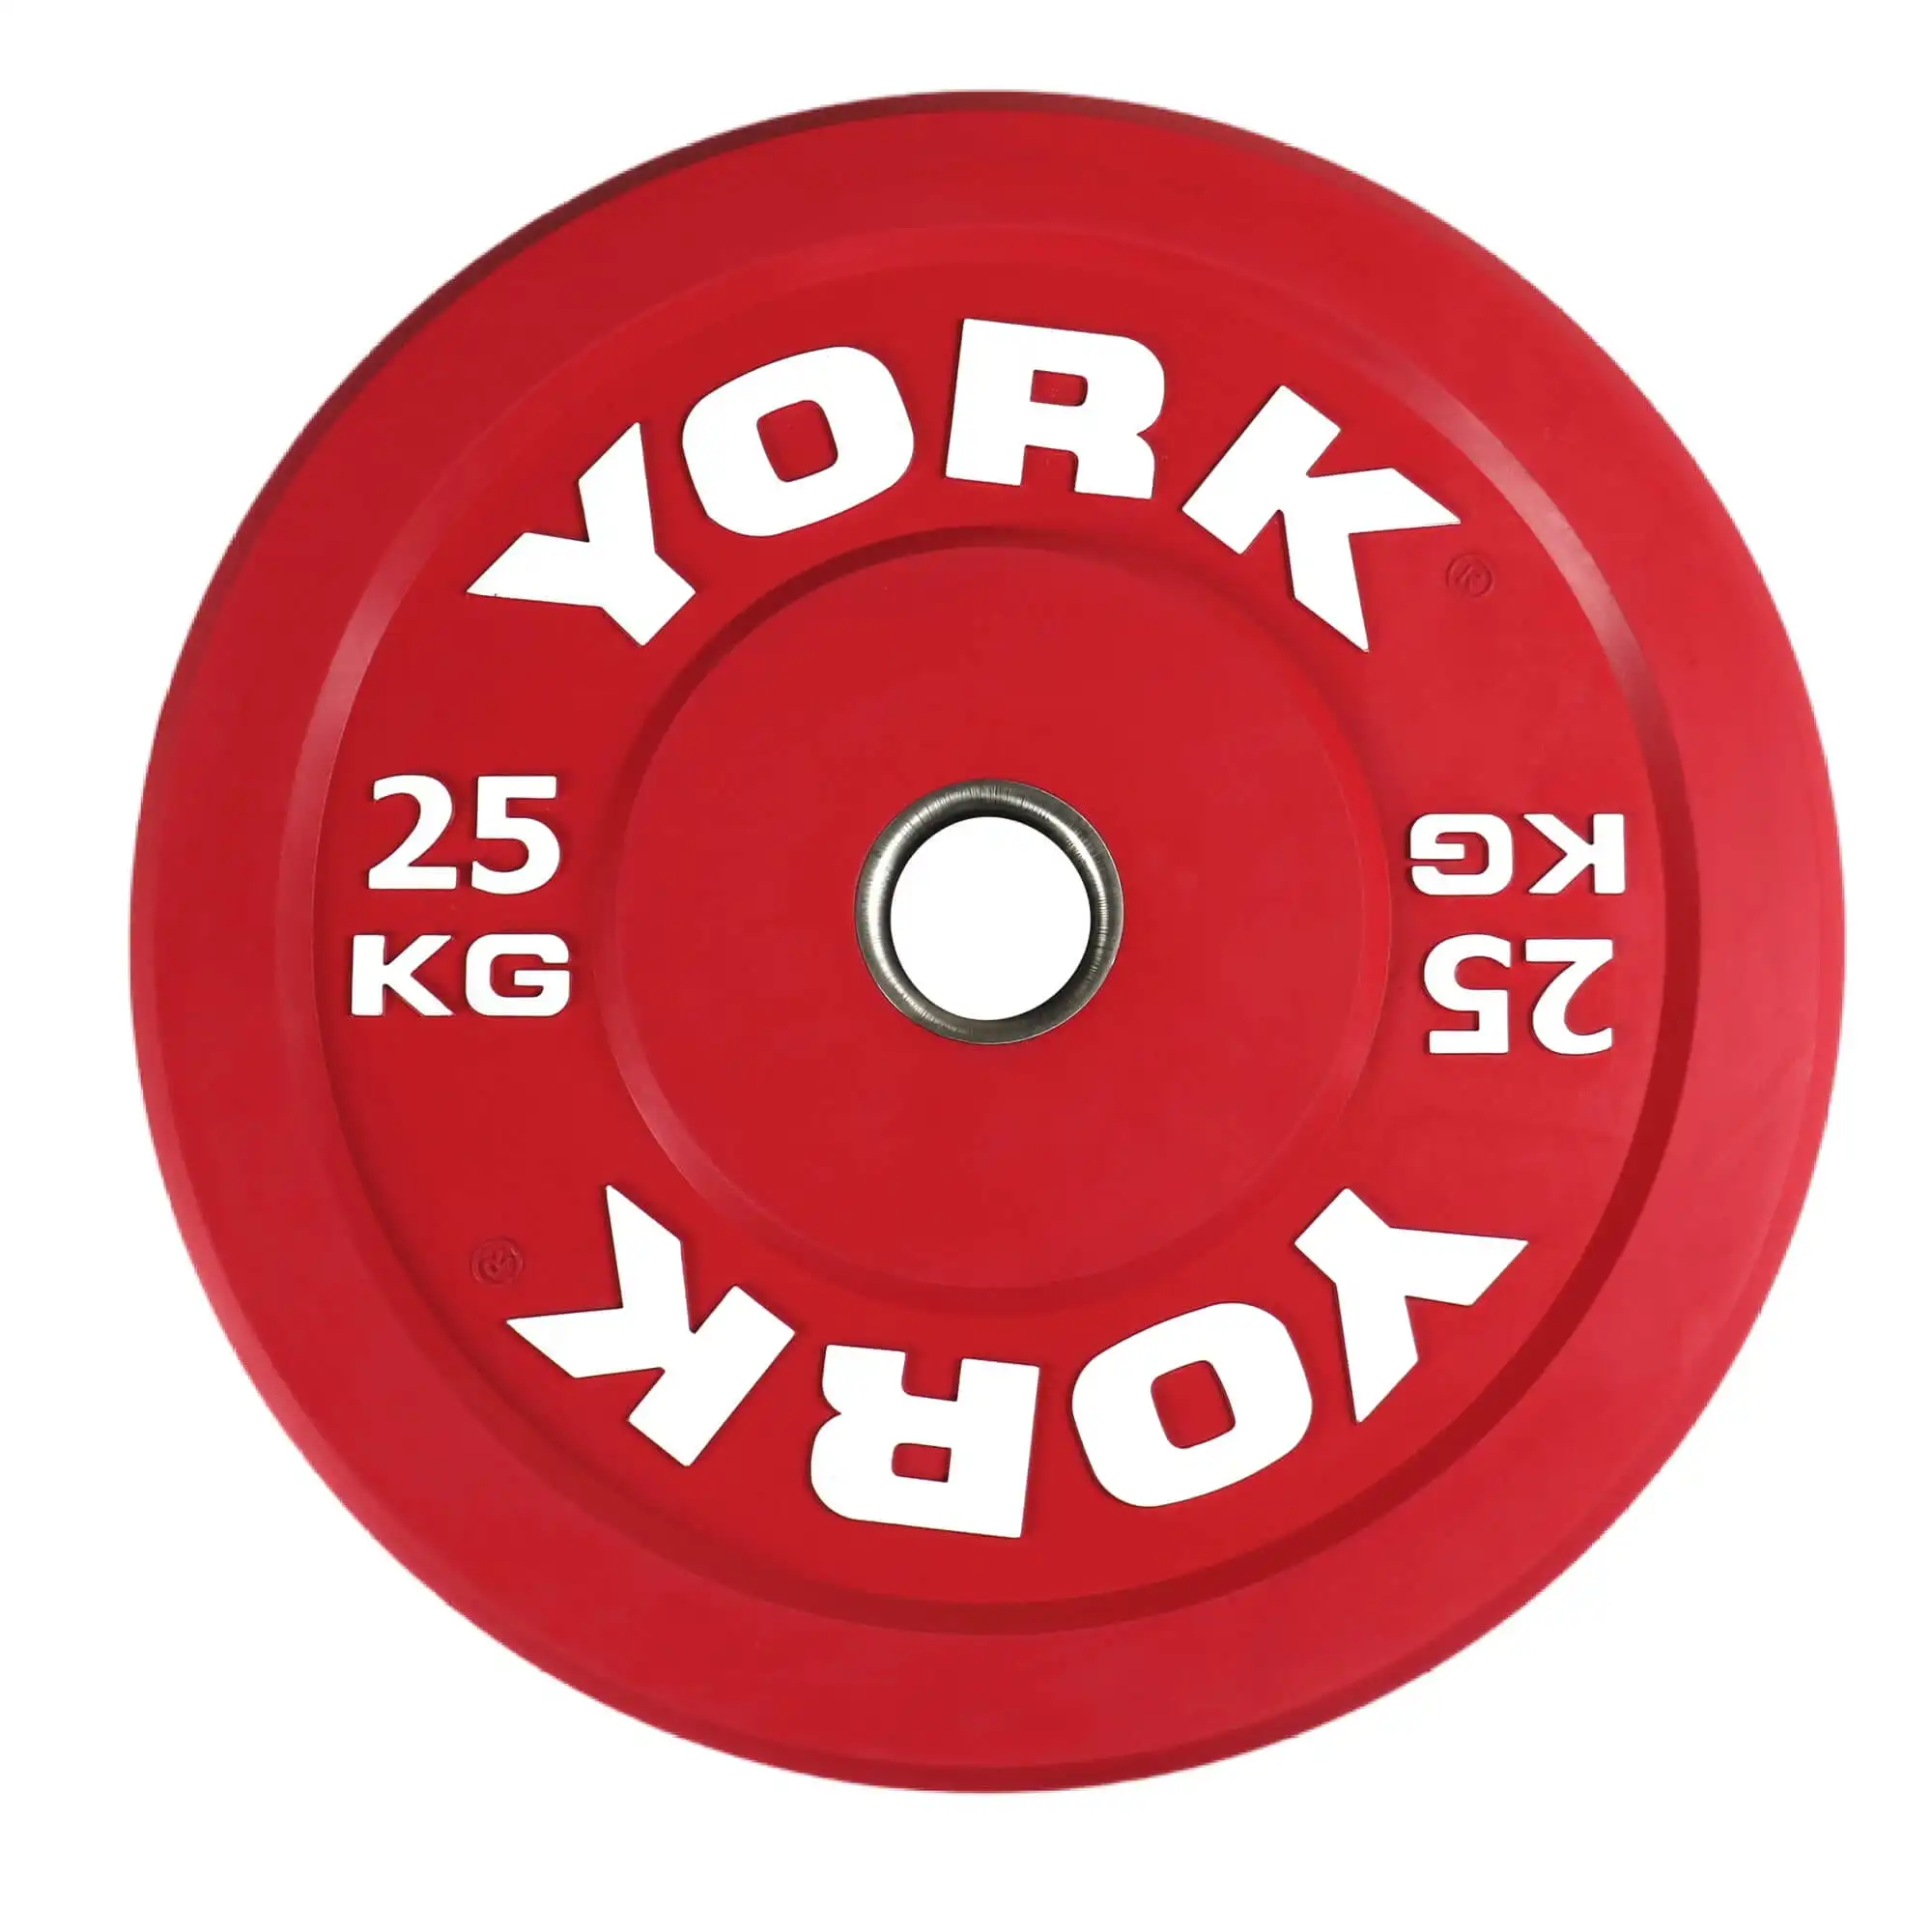 York Fitness 25KG Red Rubber bumper plate